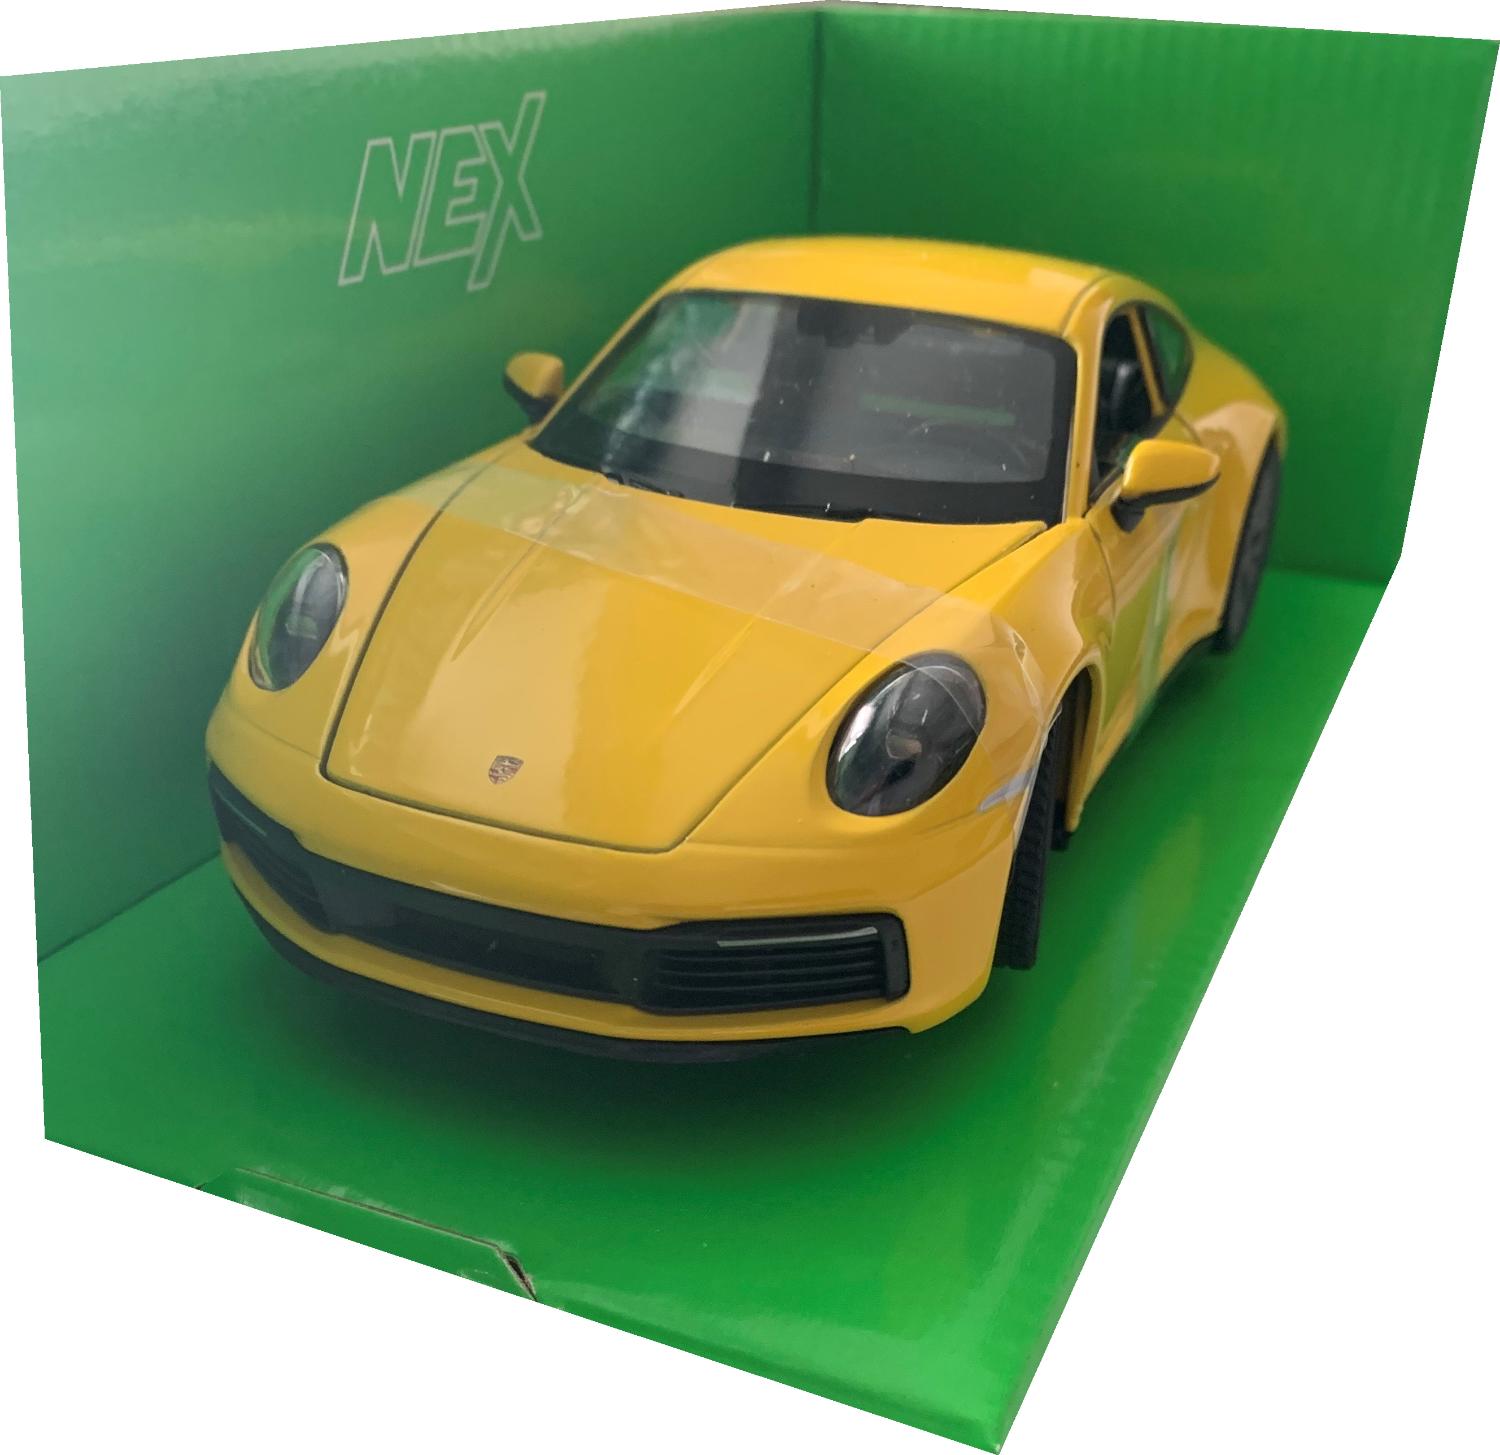 Porsche 911 Carrera 4S in yellow 1:24 scale model from Welly